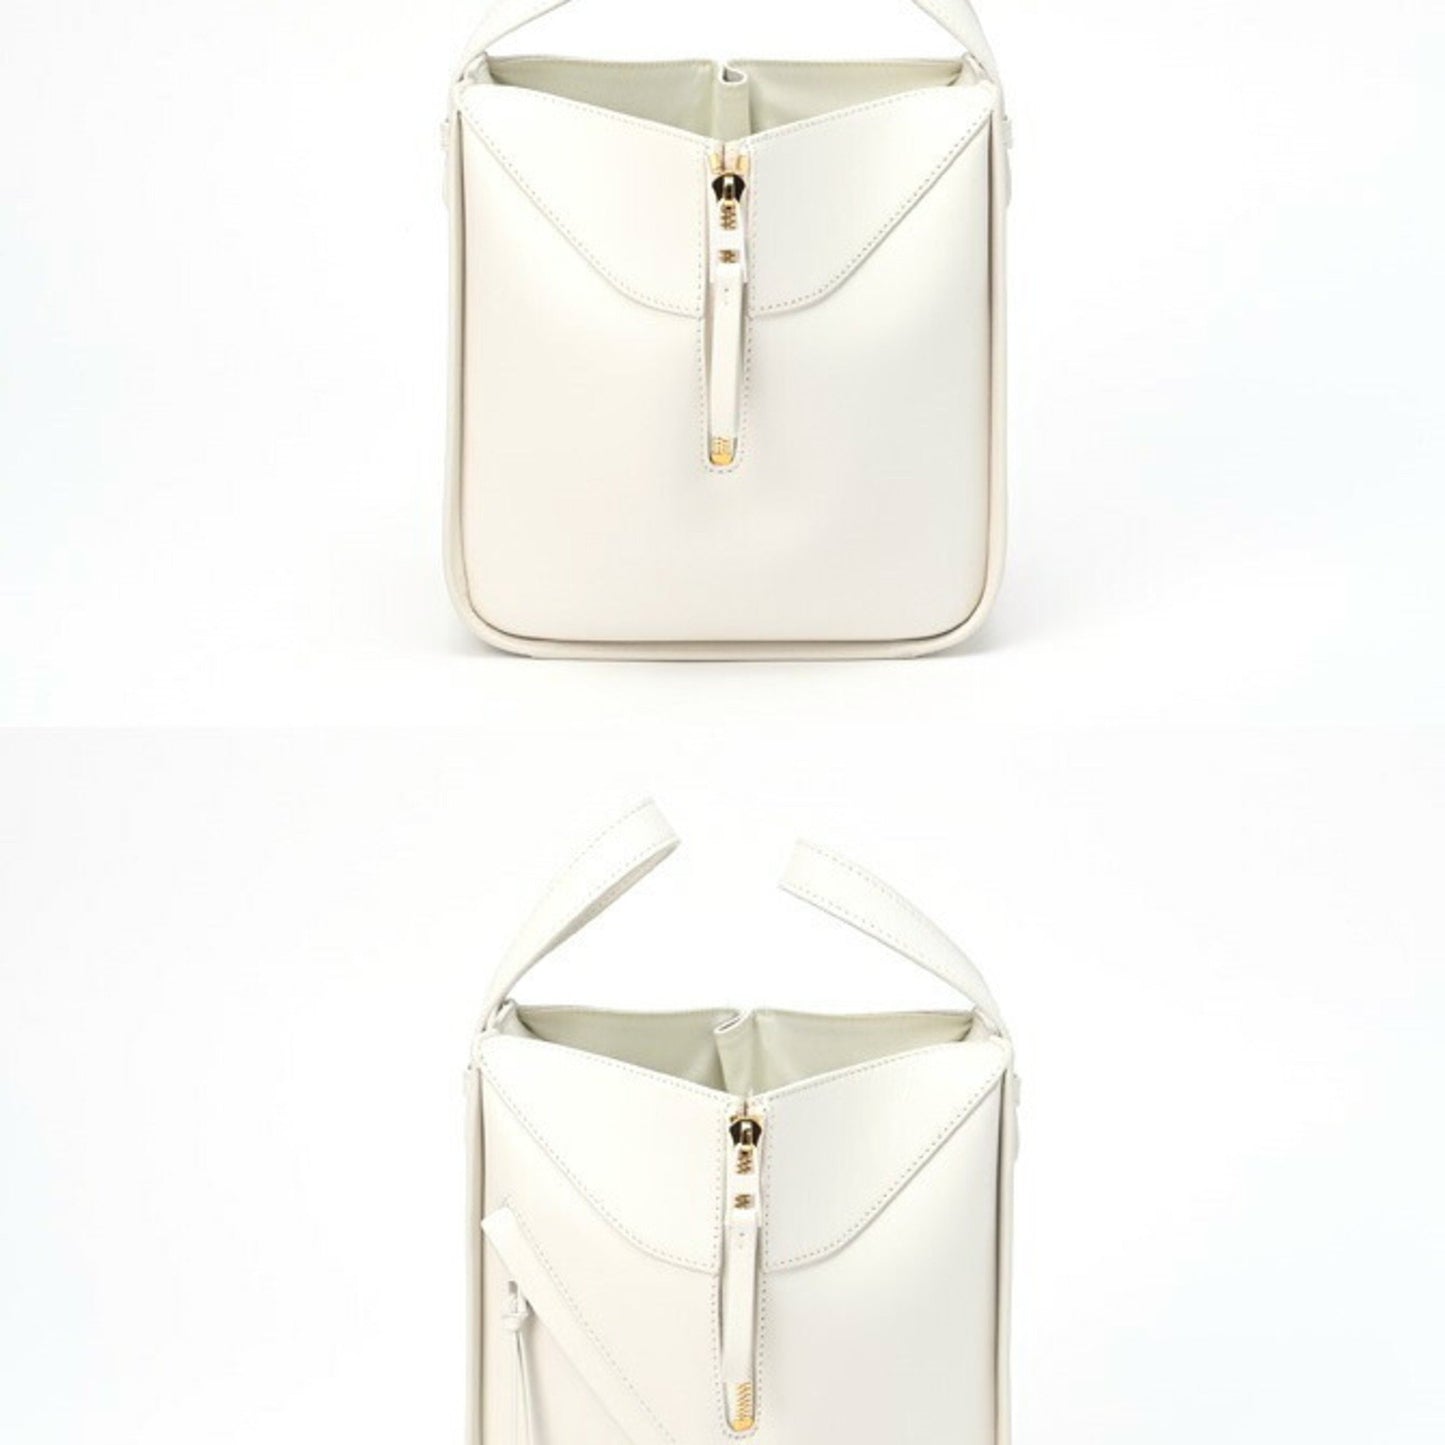 Loewe Women's Versatile white leather shoulder bag with unique silhouette in White